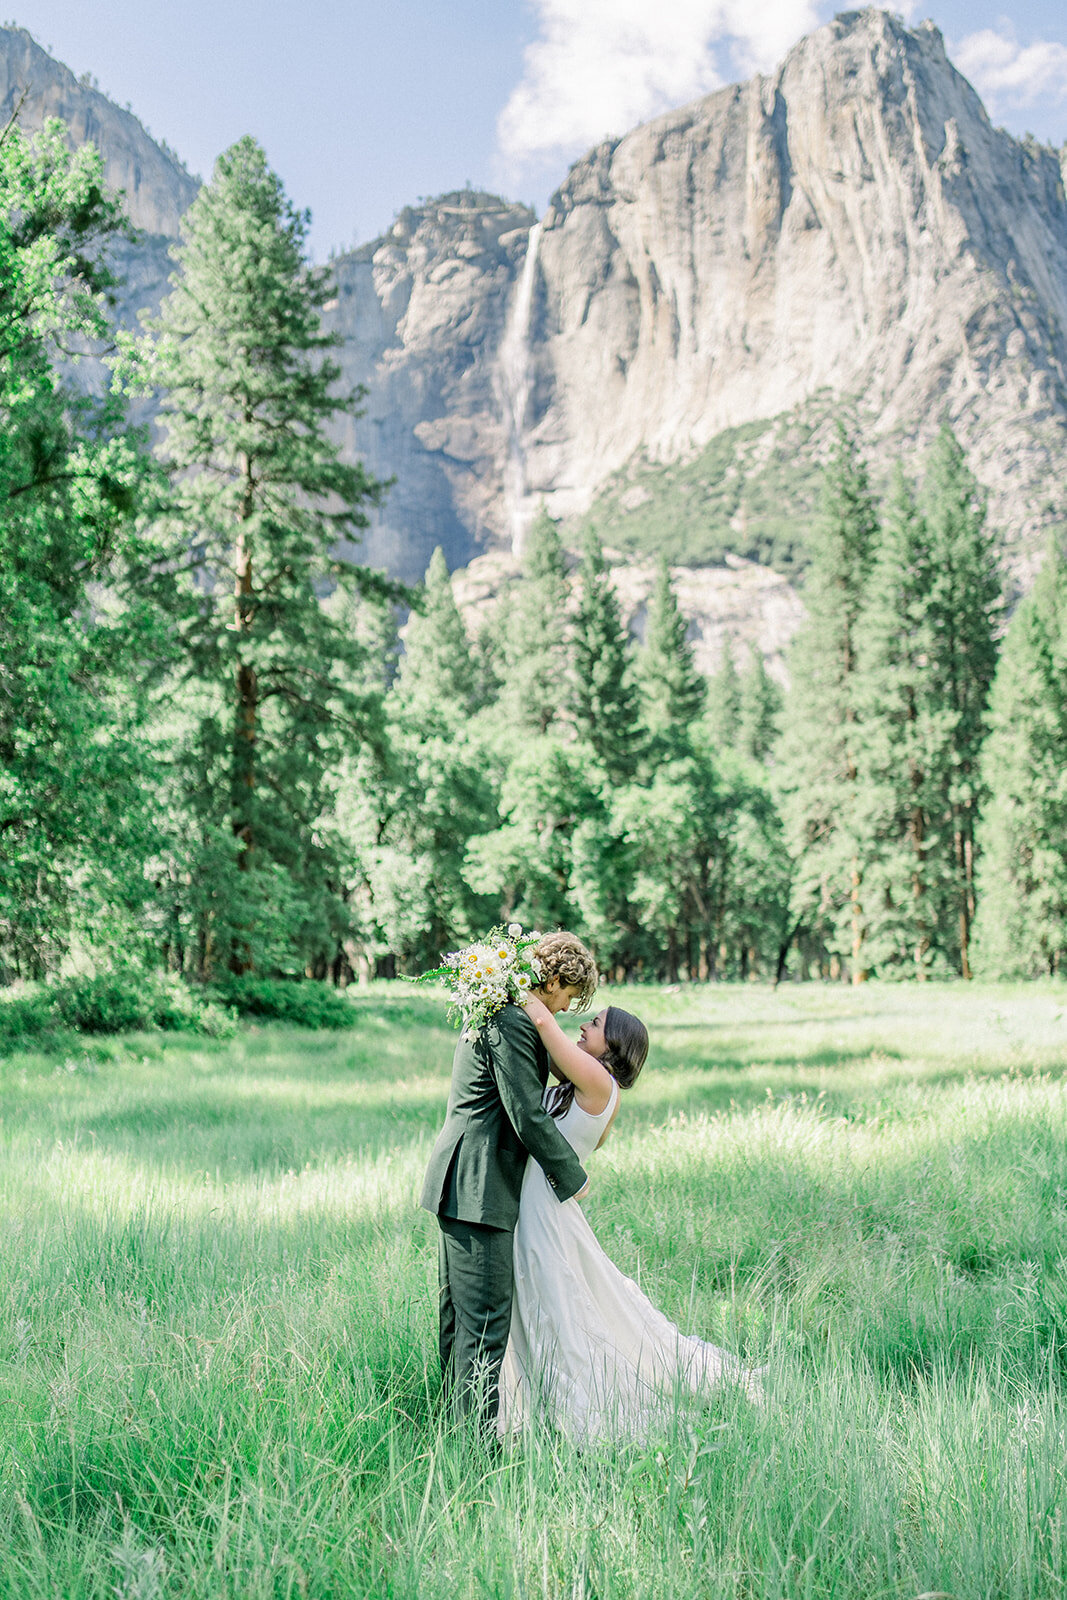 Tiffany Longeway captures the enchanting beauty of a fairytale elopement in Yosemite National Park, with the majestic natural scenery providing a breathtaking backdrop for the couple's intimate moment.